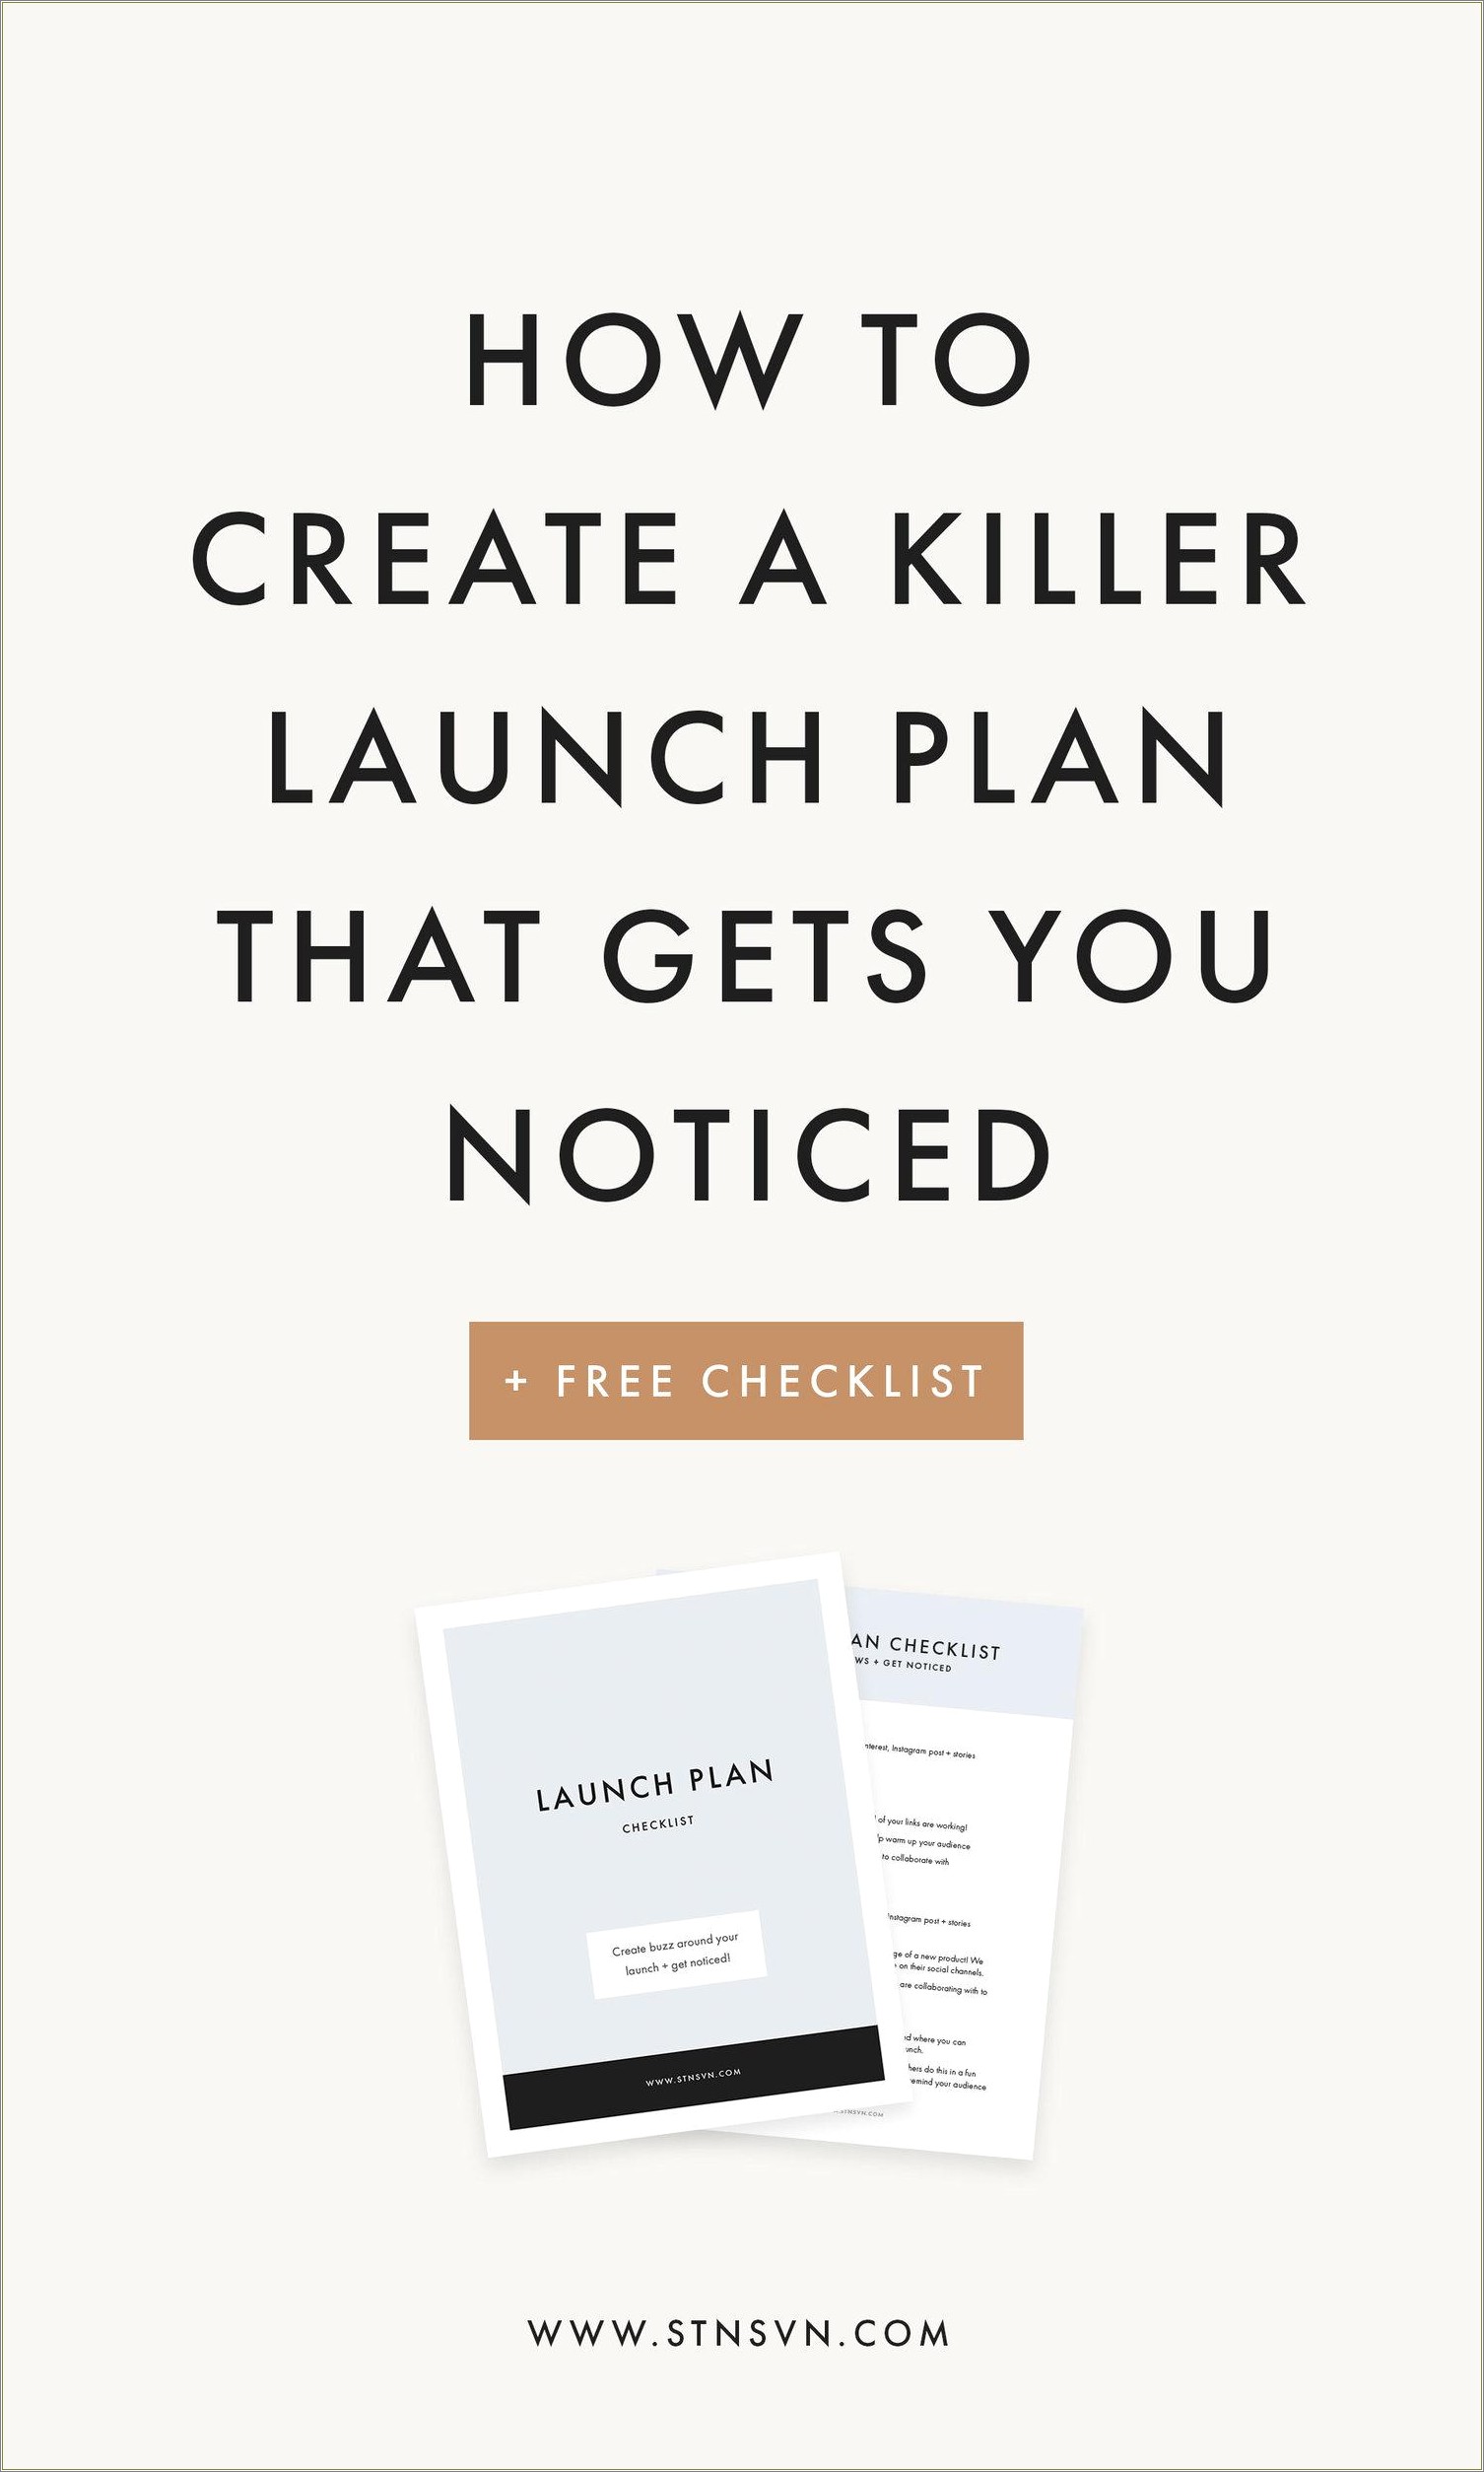 Free New Product Marketing Plan Template